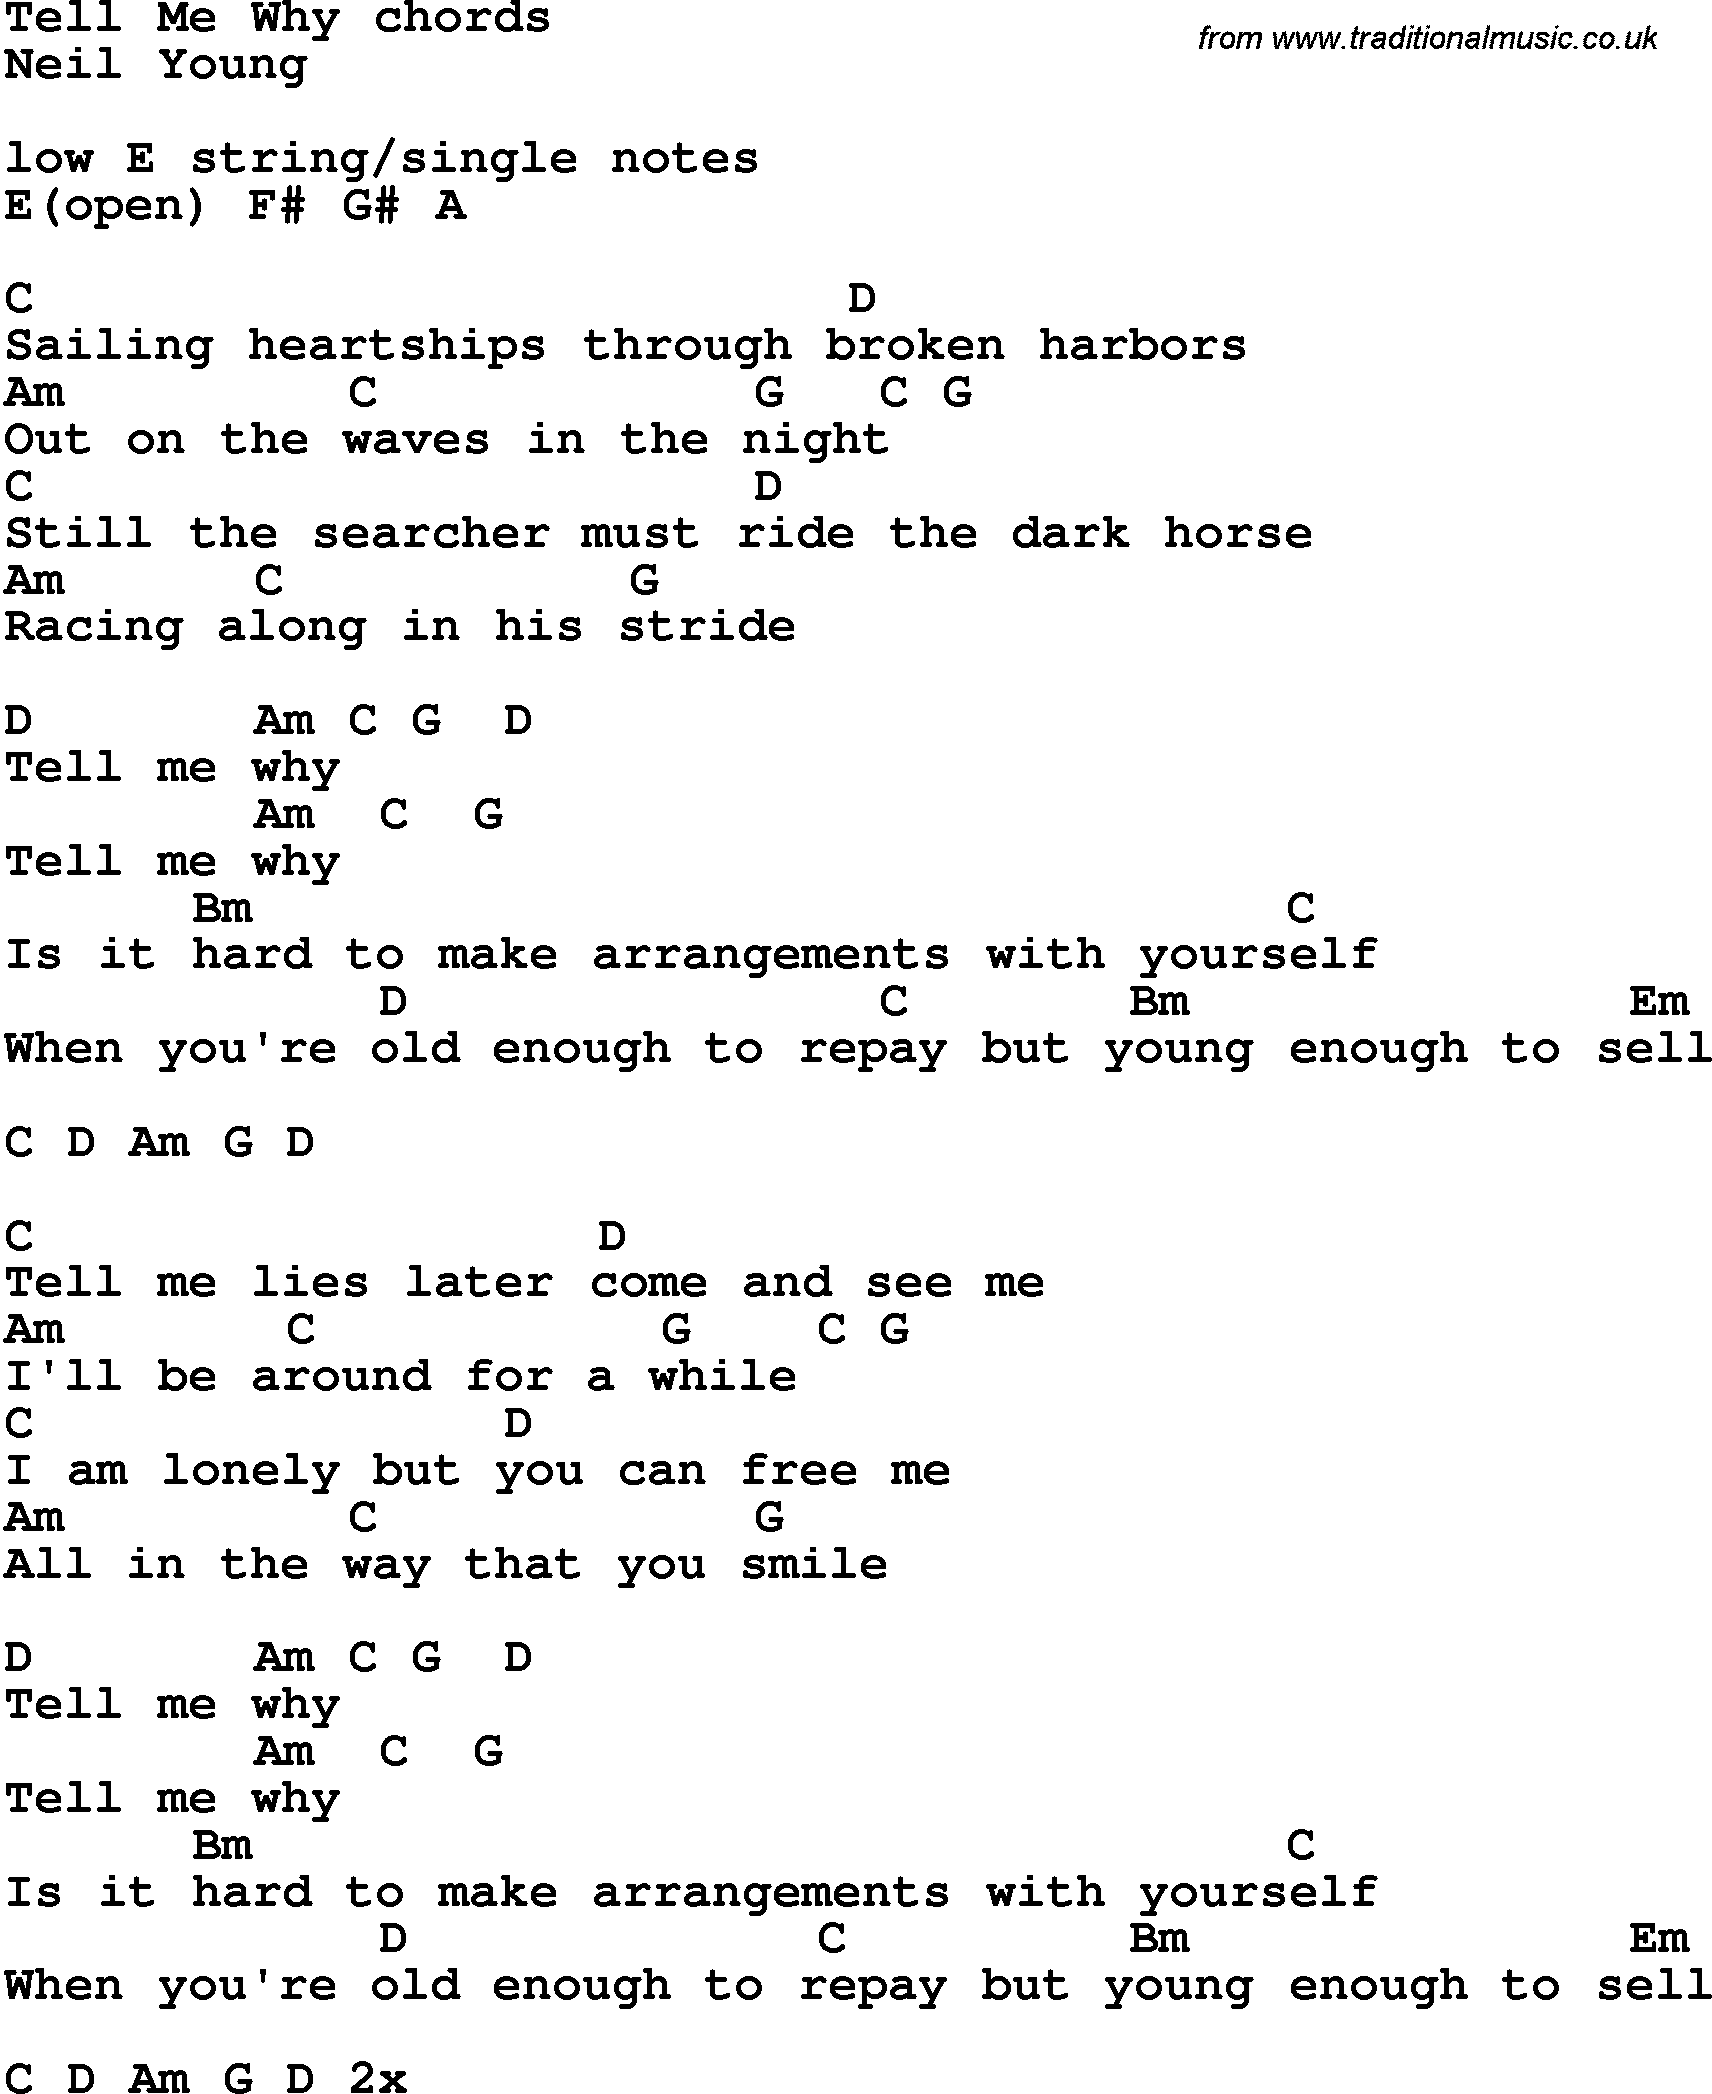 Song Lyrics with guitar chords for Tell Me Why - Neil Young